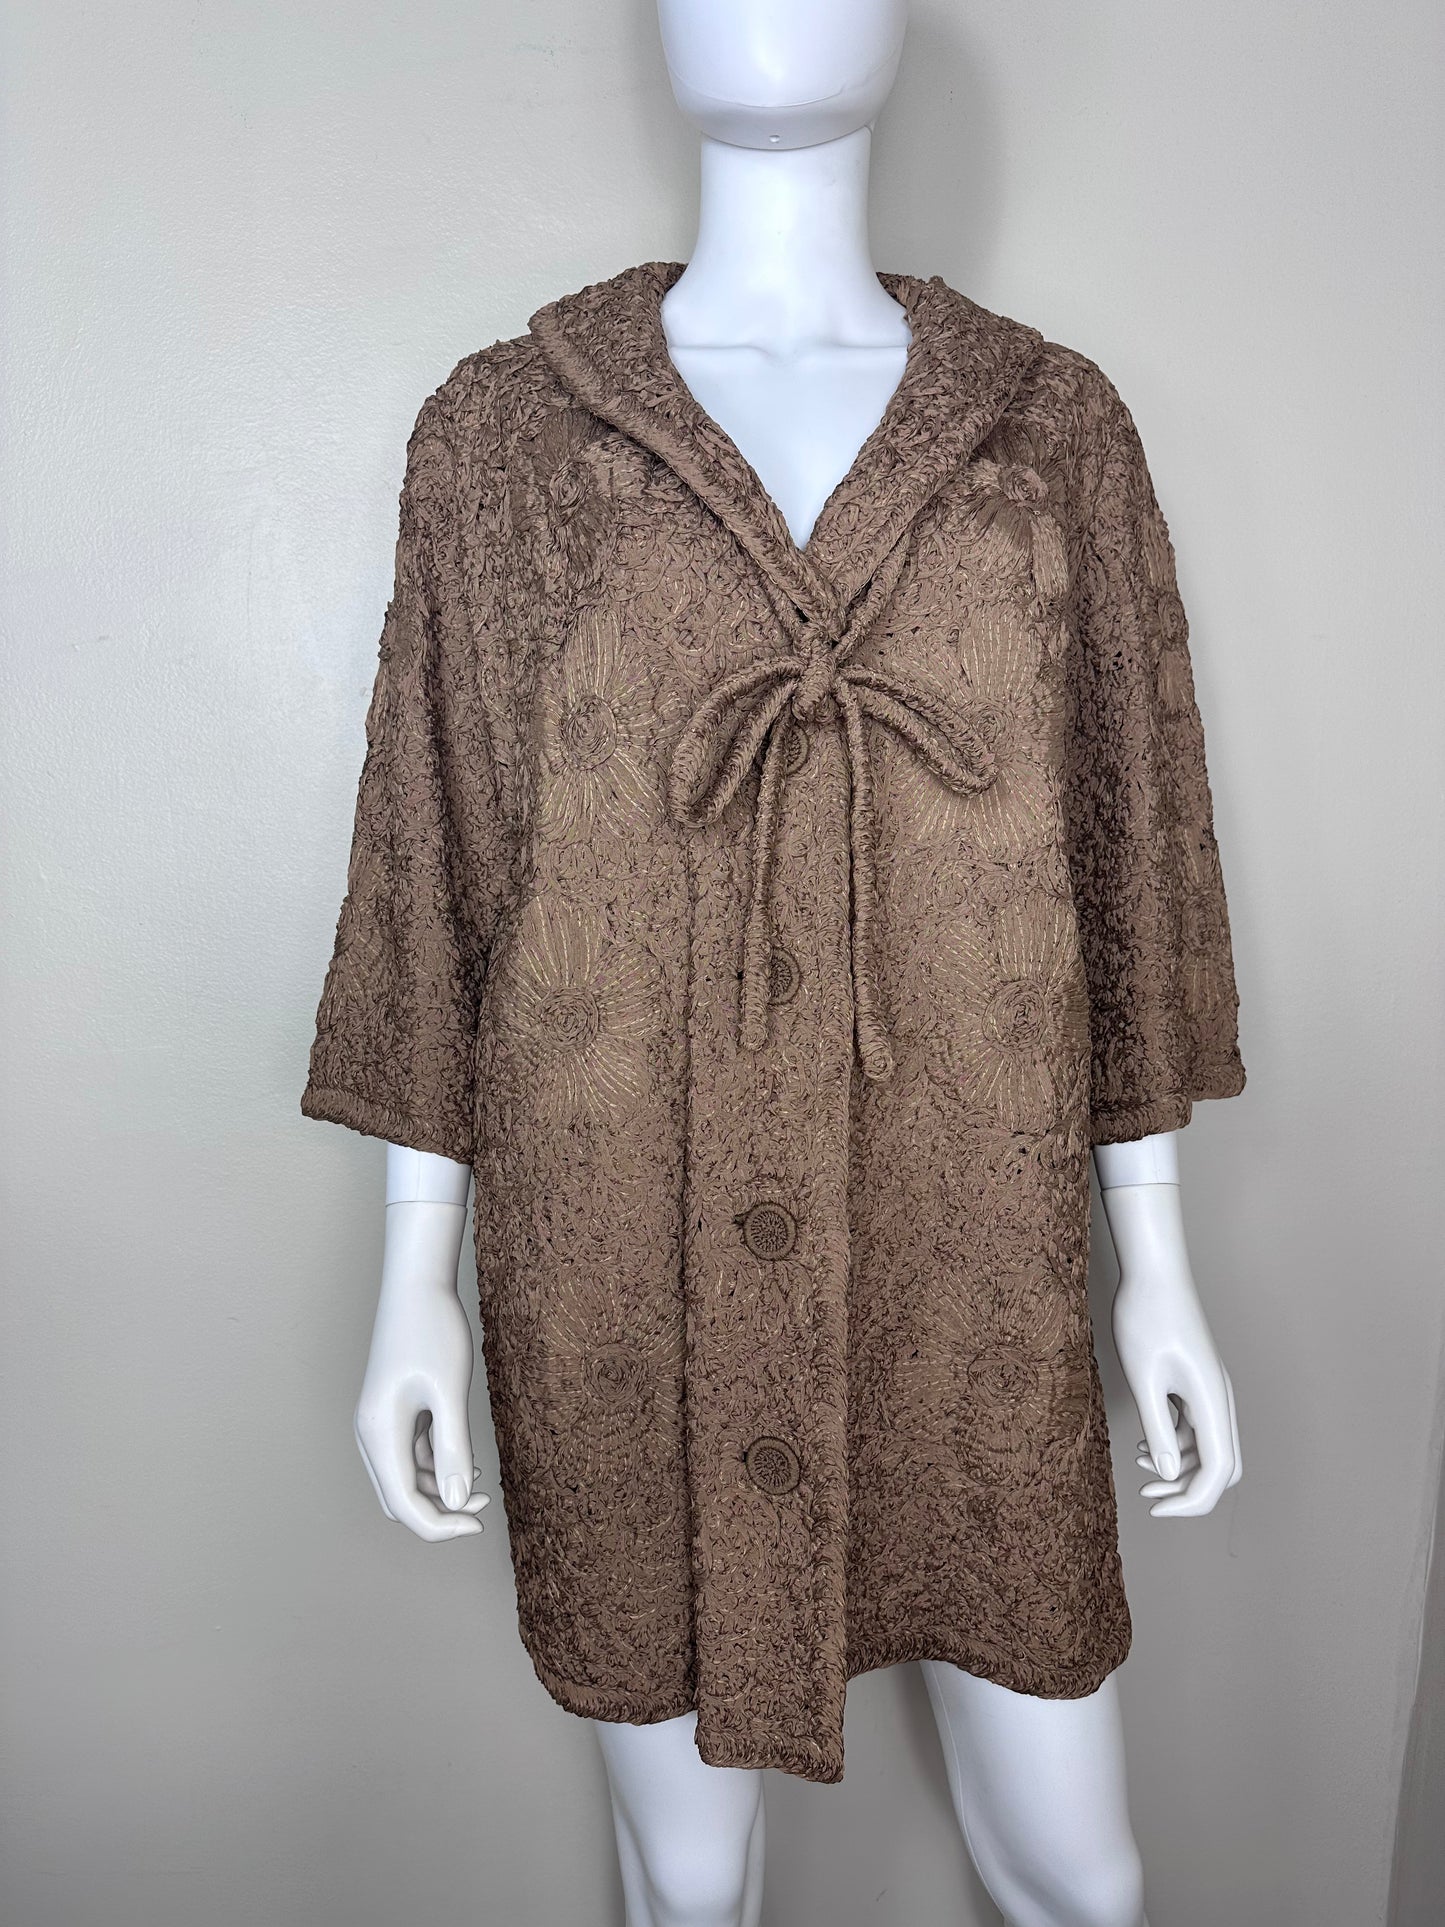 1950s/60s Brown Ribbon Work Coat, The Halle Bros Co Specialty Shop Size Large